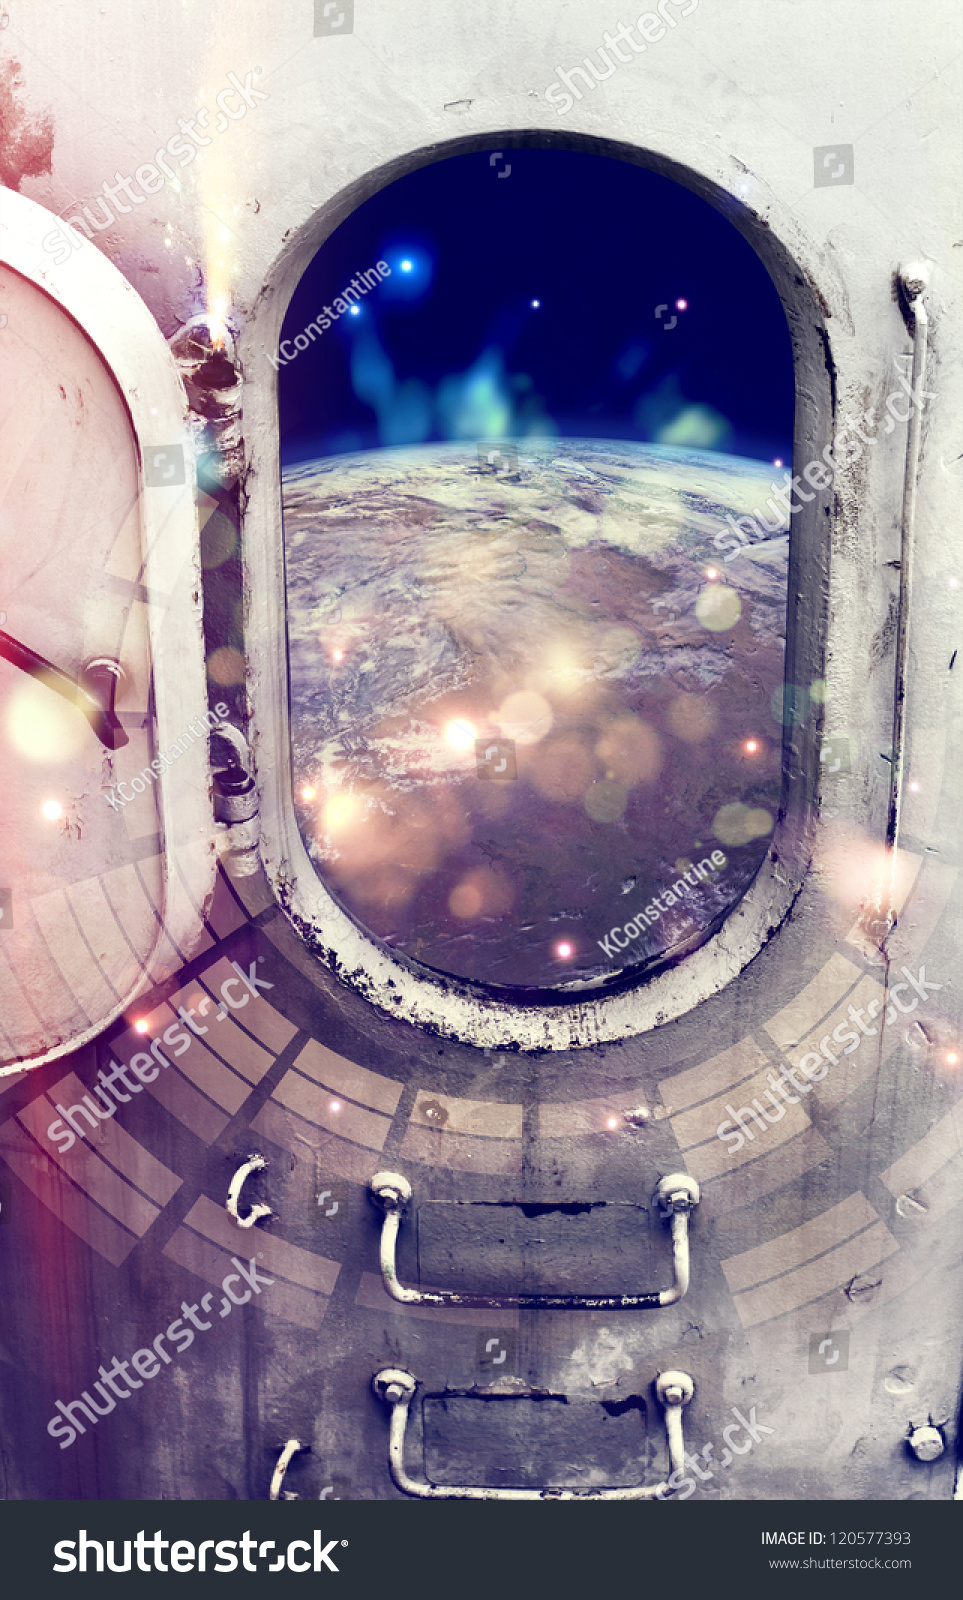 Planet Earth through the window of spaceship.Elements of this image furnished by NASA. #120577393